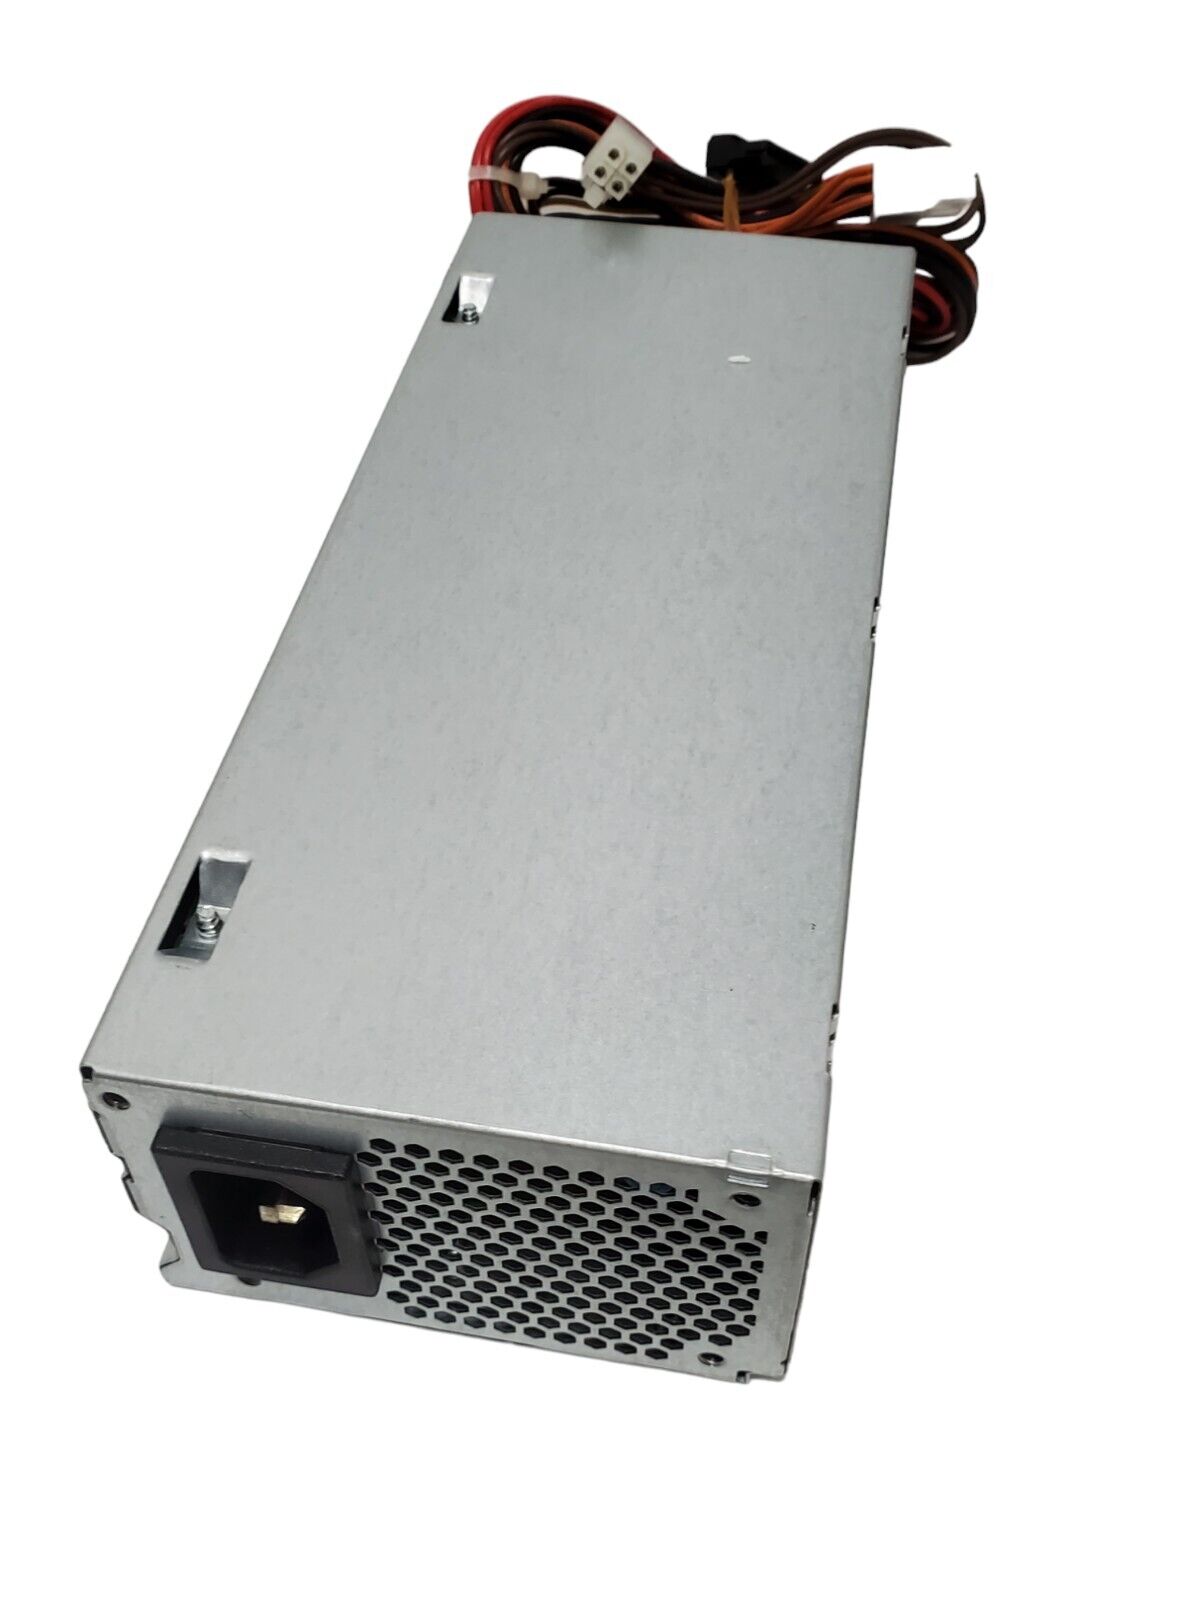 FH-ZD221MGR Power Supply Unit 220W For HP S5-1xxx 633195-001 PS-6221-9 PS-6221-7